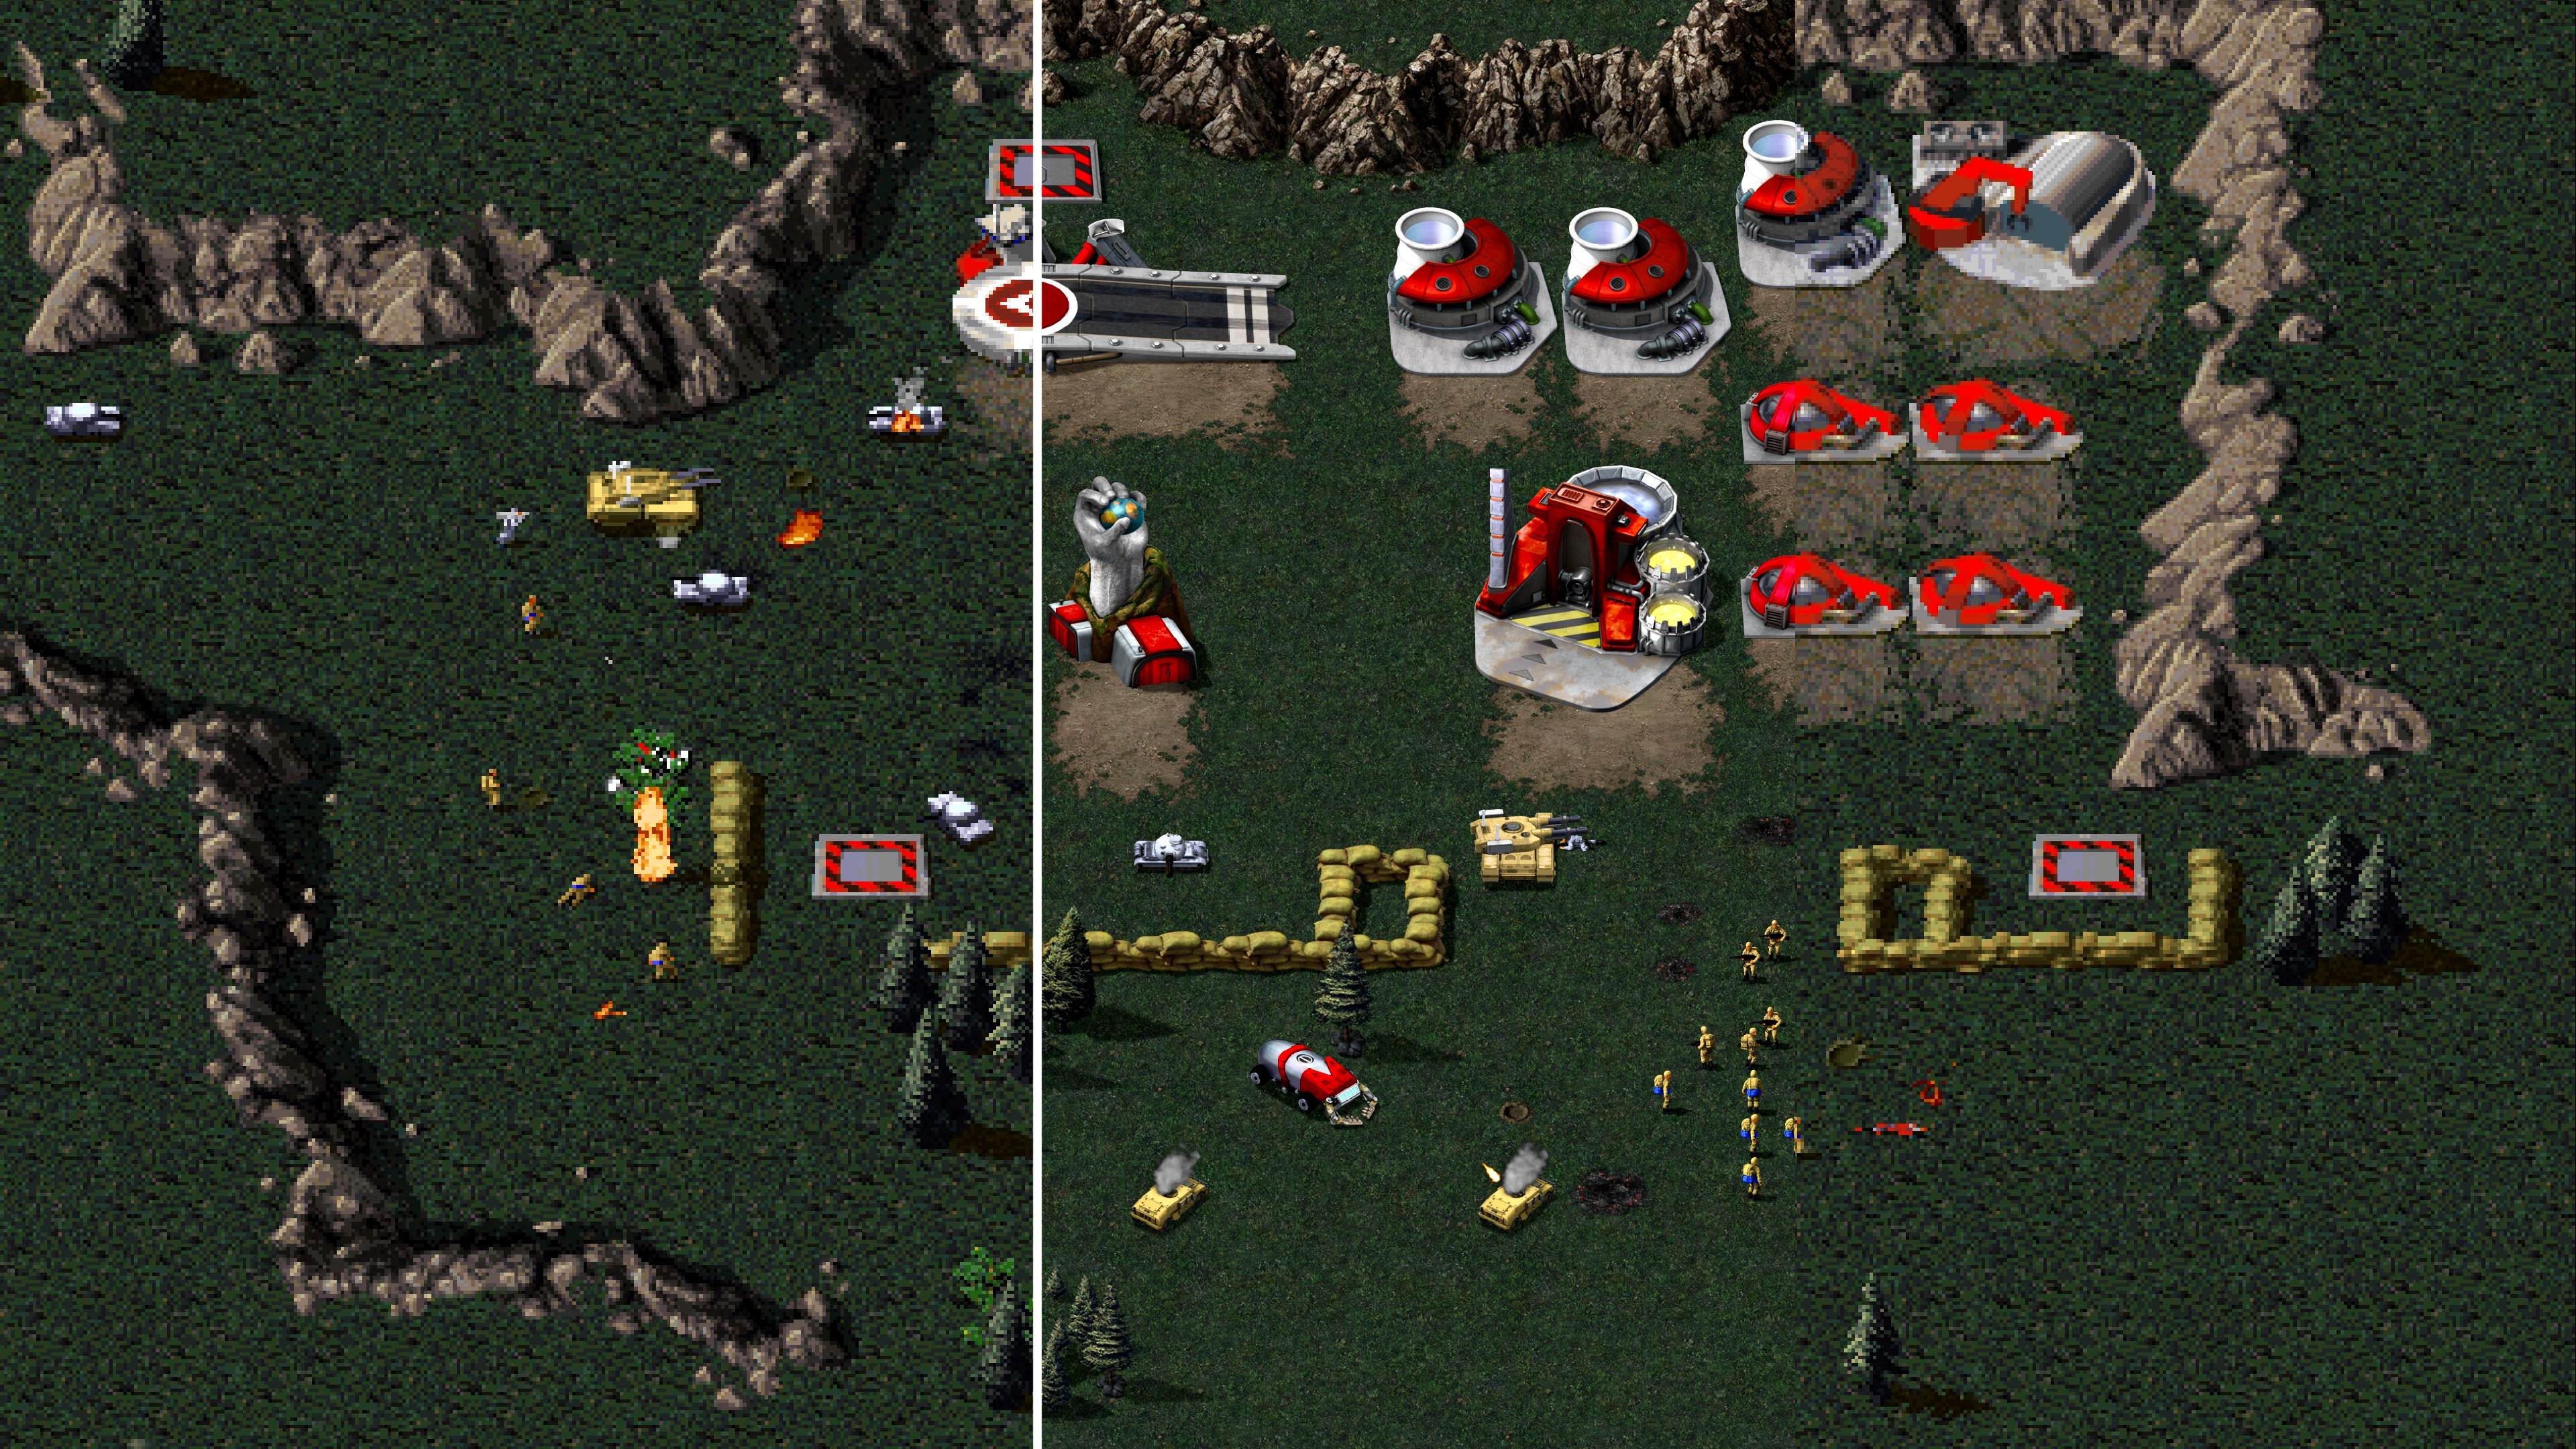 Command and conquer remastered. Command Conquer Remastered collection 2020. Command and Conquer 1995 Remaster. Command Conquer Tiberian Dawn Remastered. CNC Remastered collection.